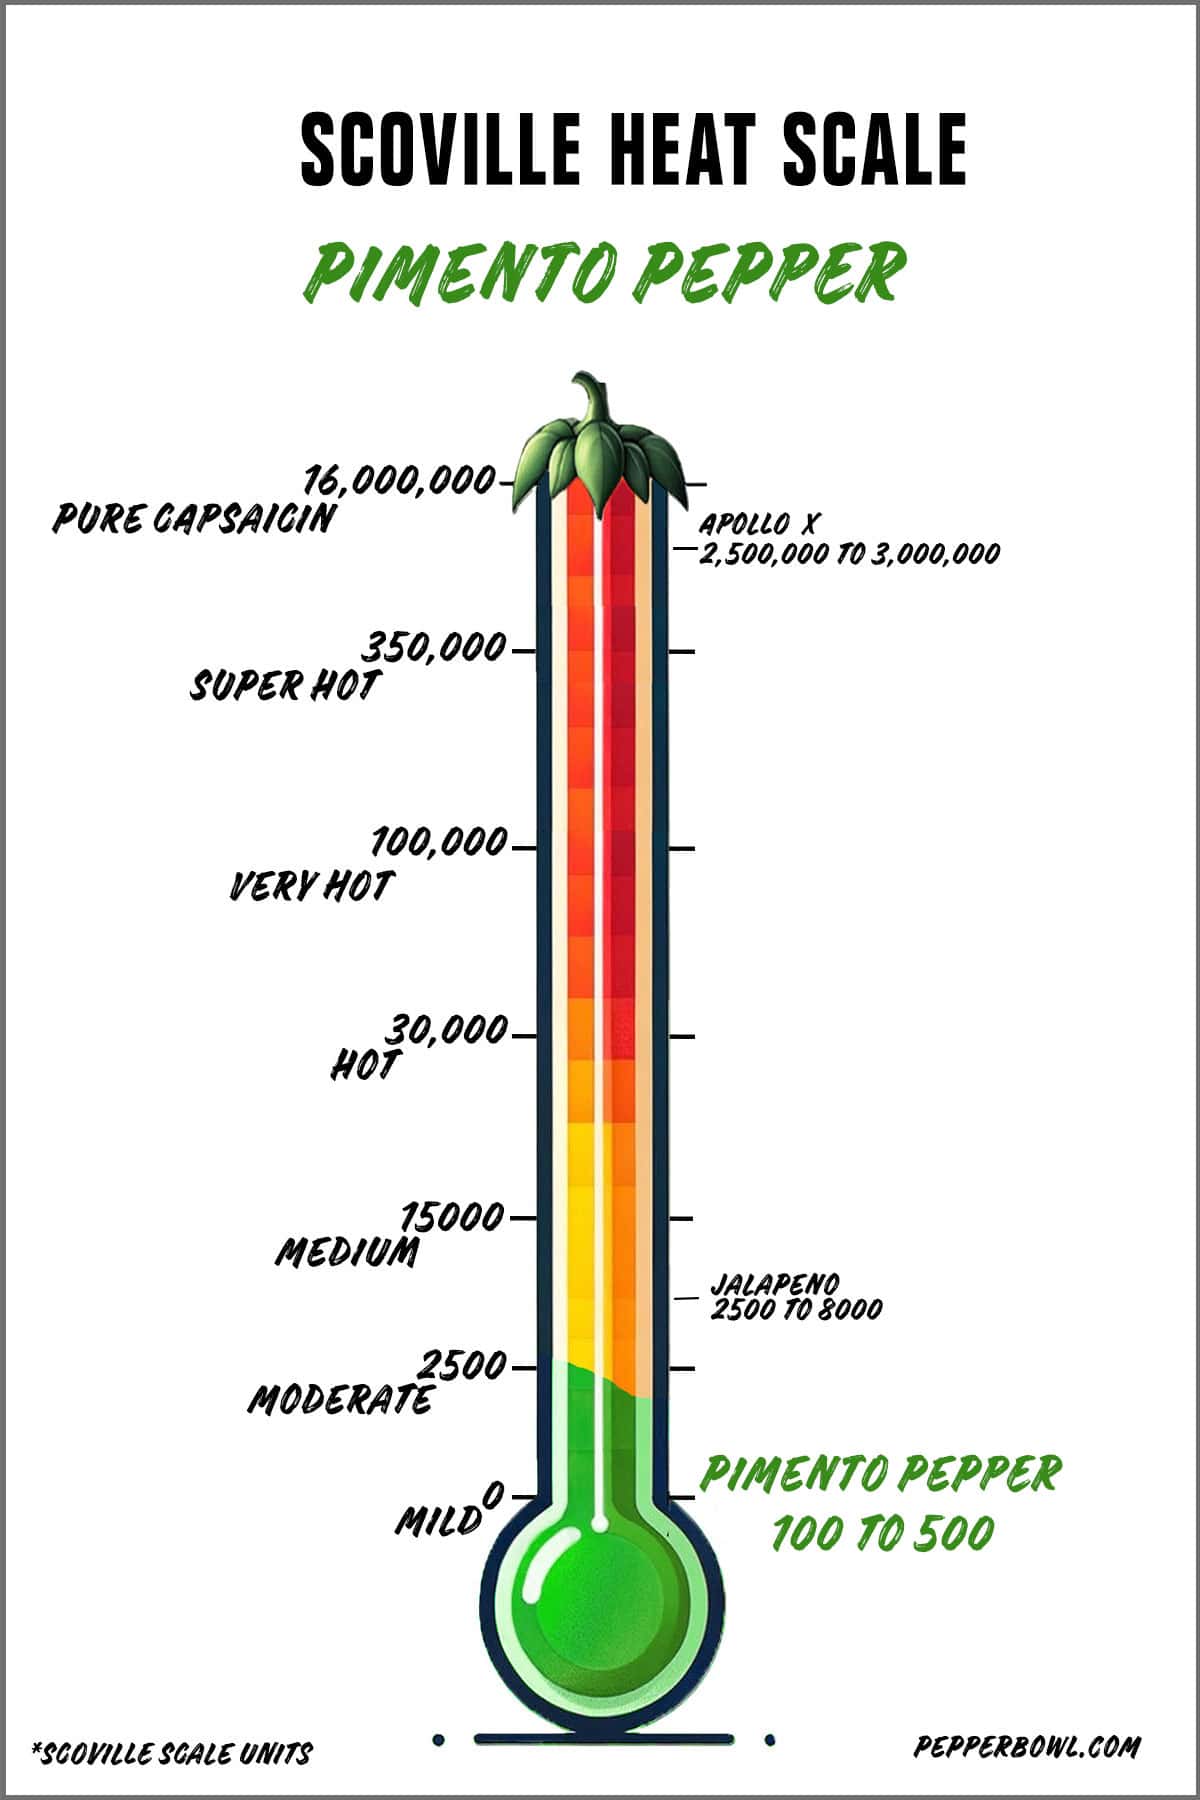 Illustration of the pimento pepper in the Scoville scale, representing its heat intensity.